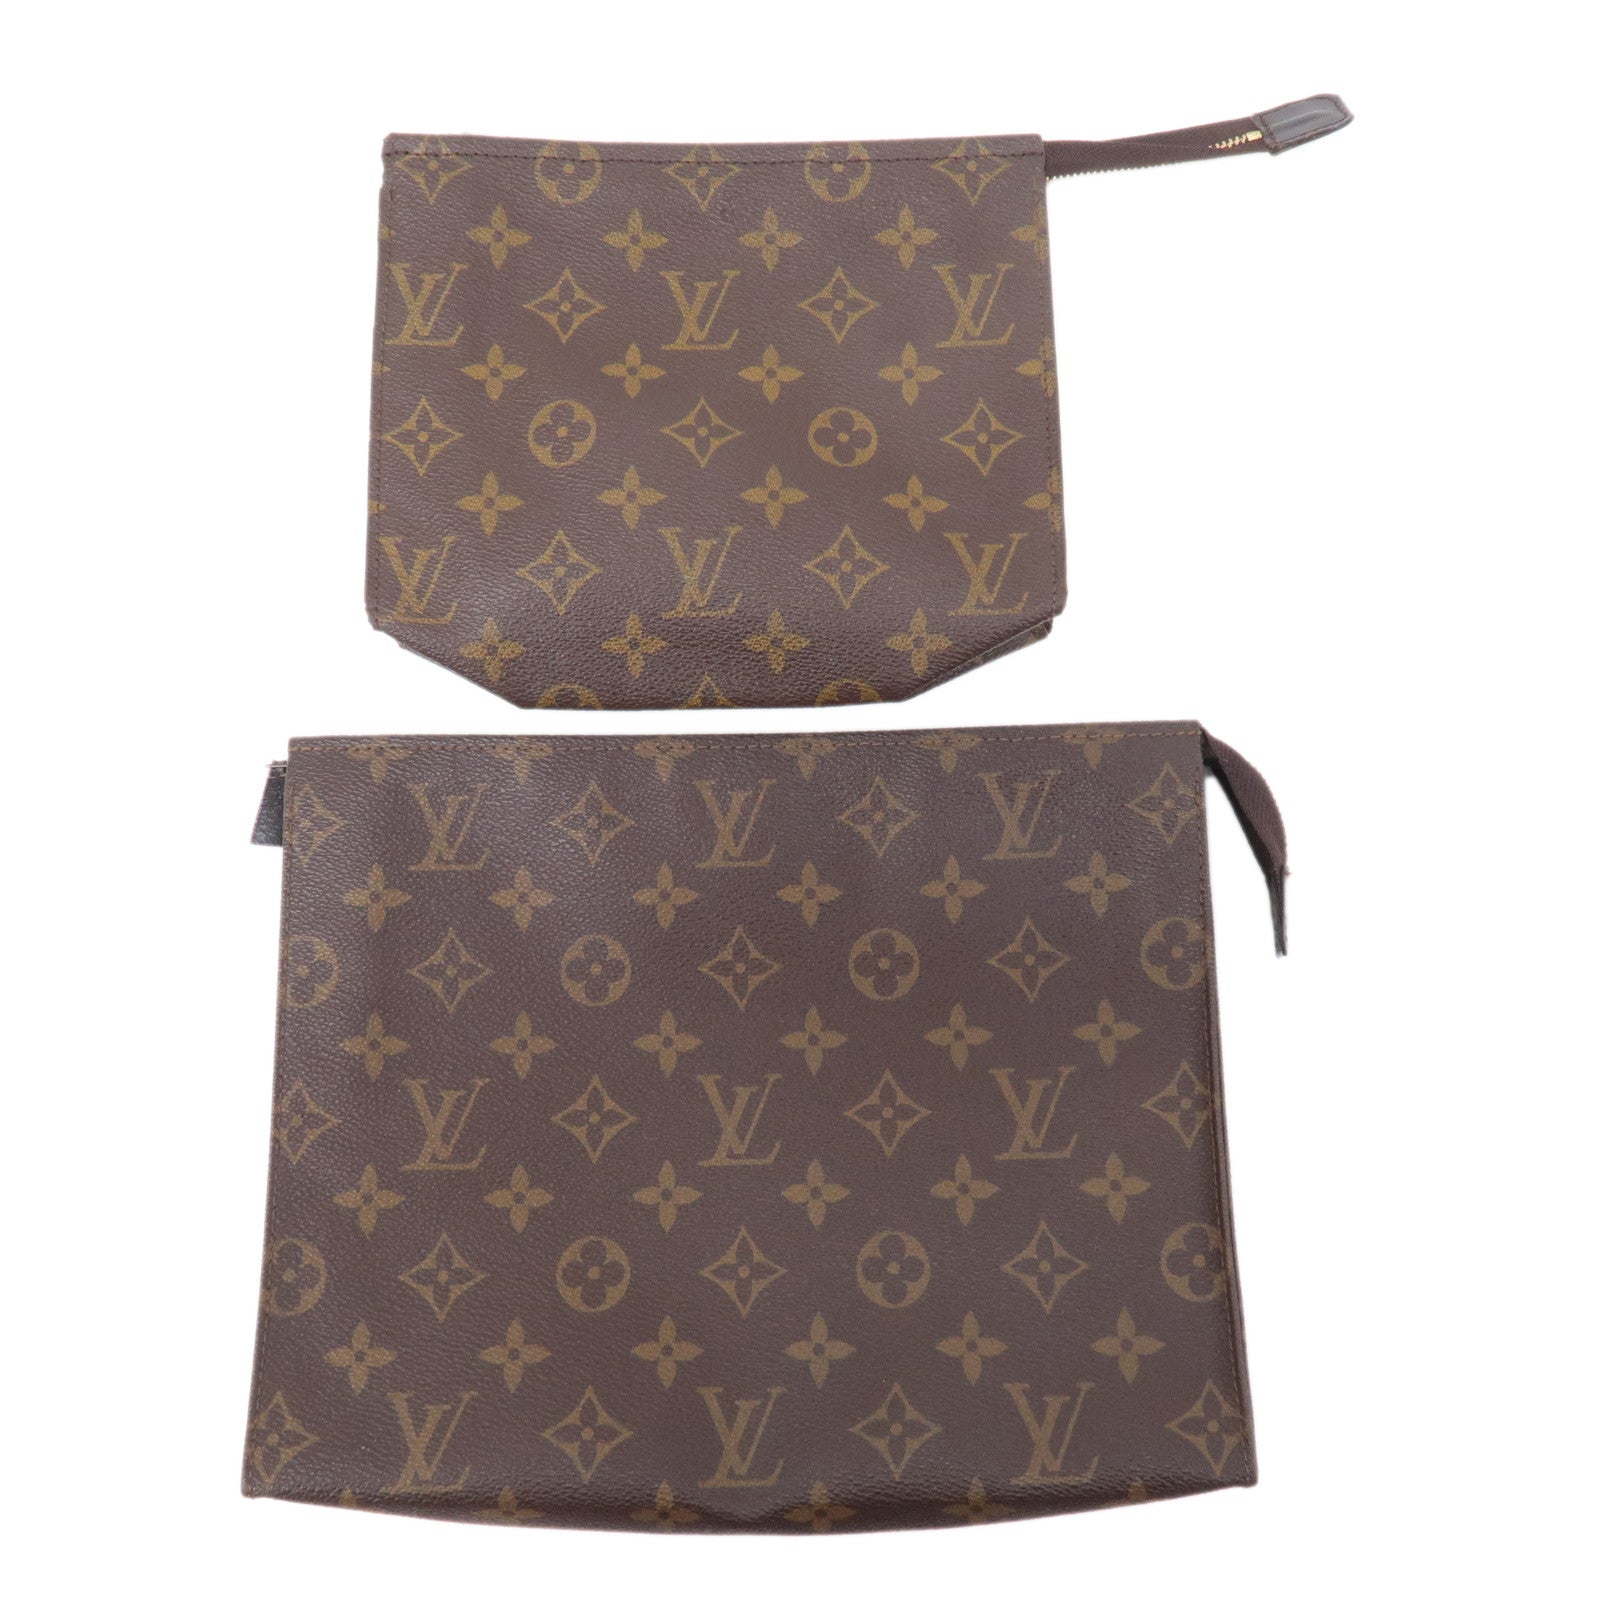 louis vuitton two bags in one